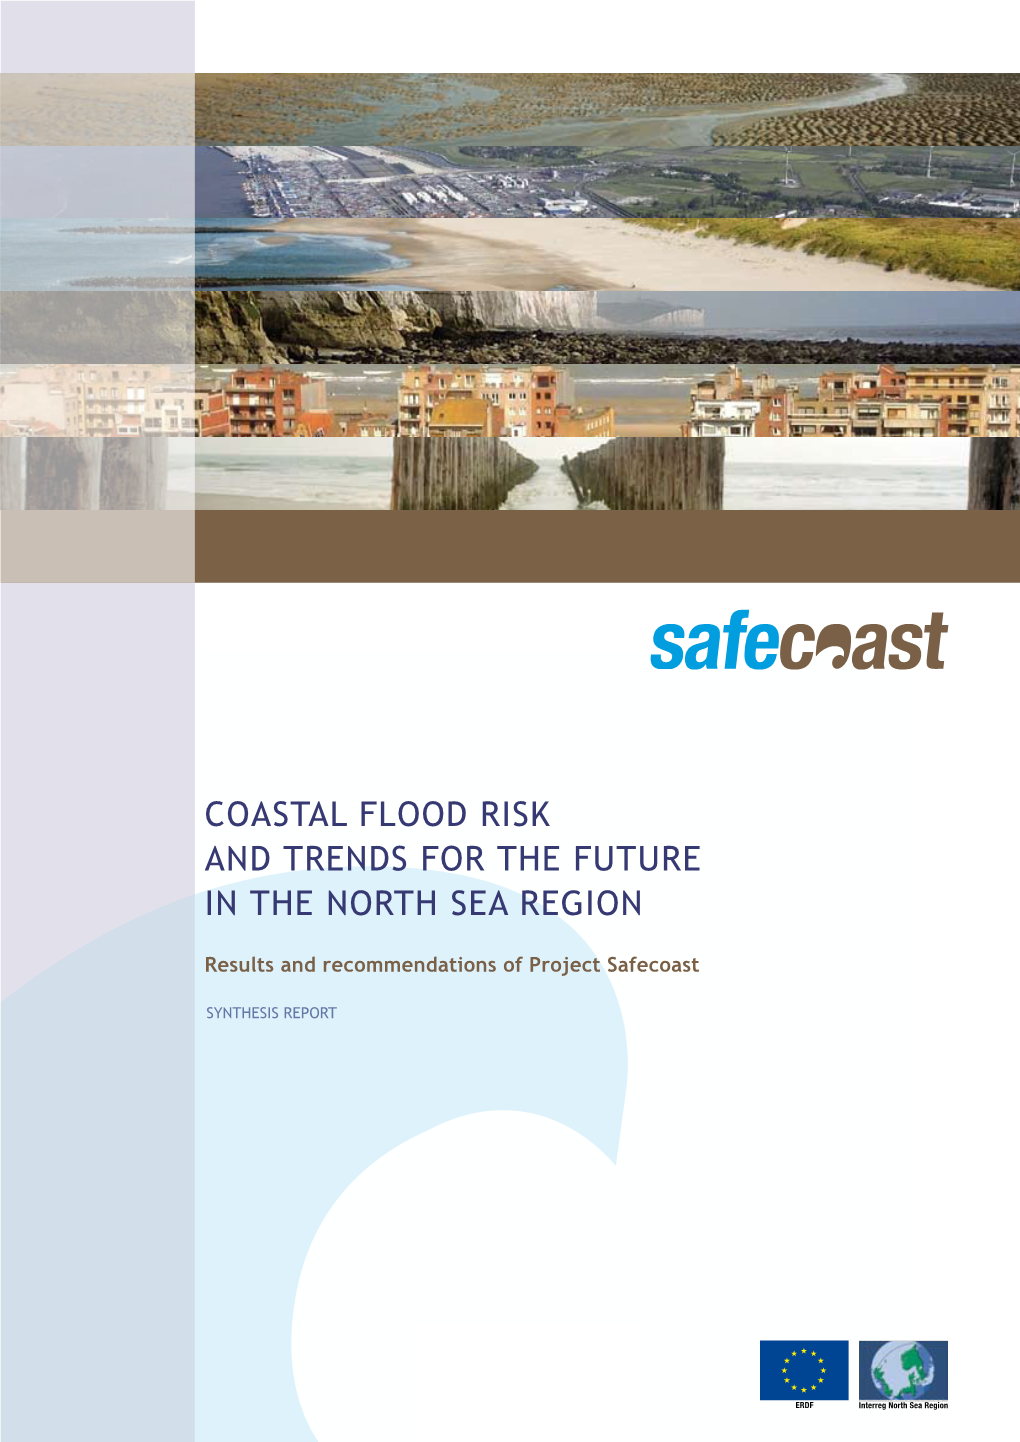 Coastal Flood Risk and Trends for the Future in the North Sea Region